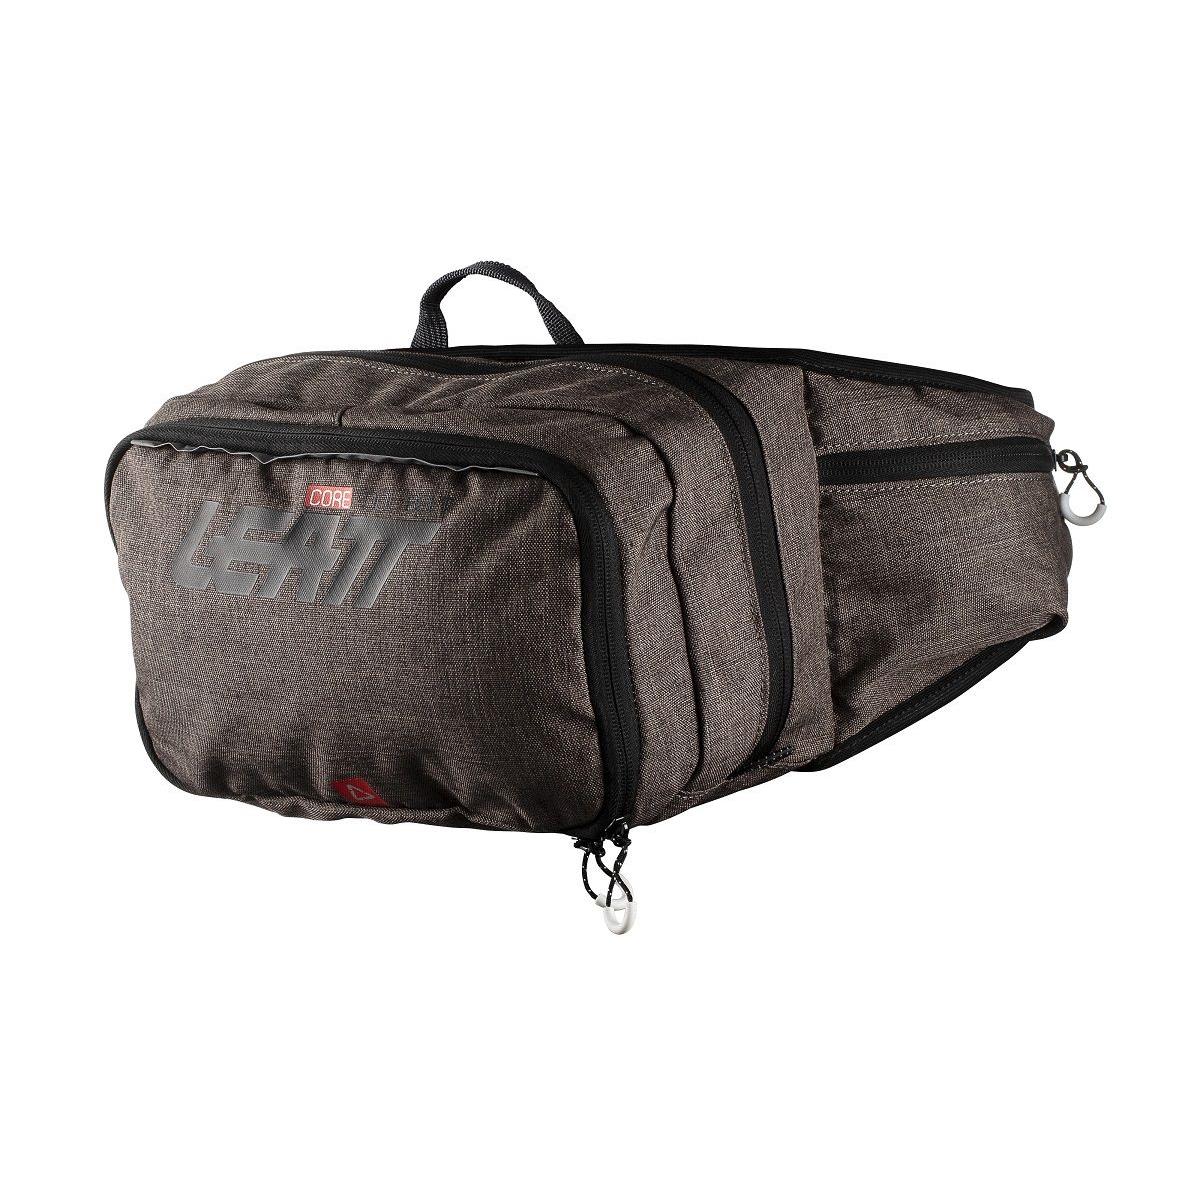 Leatt Hip Pack with Hydration System Compartment GPX Core 2.0 Black